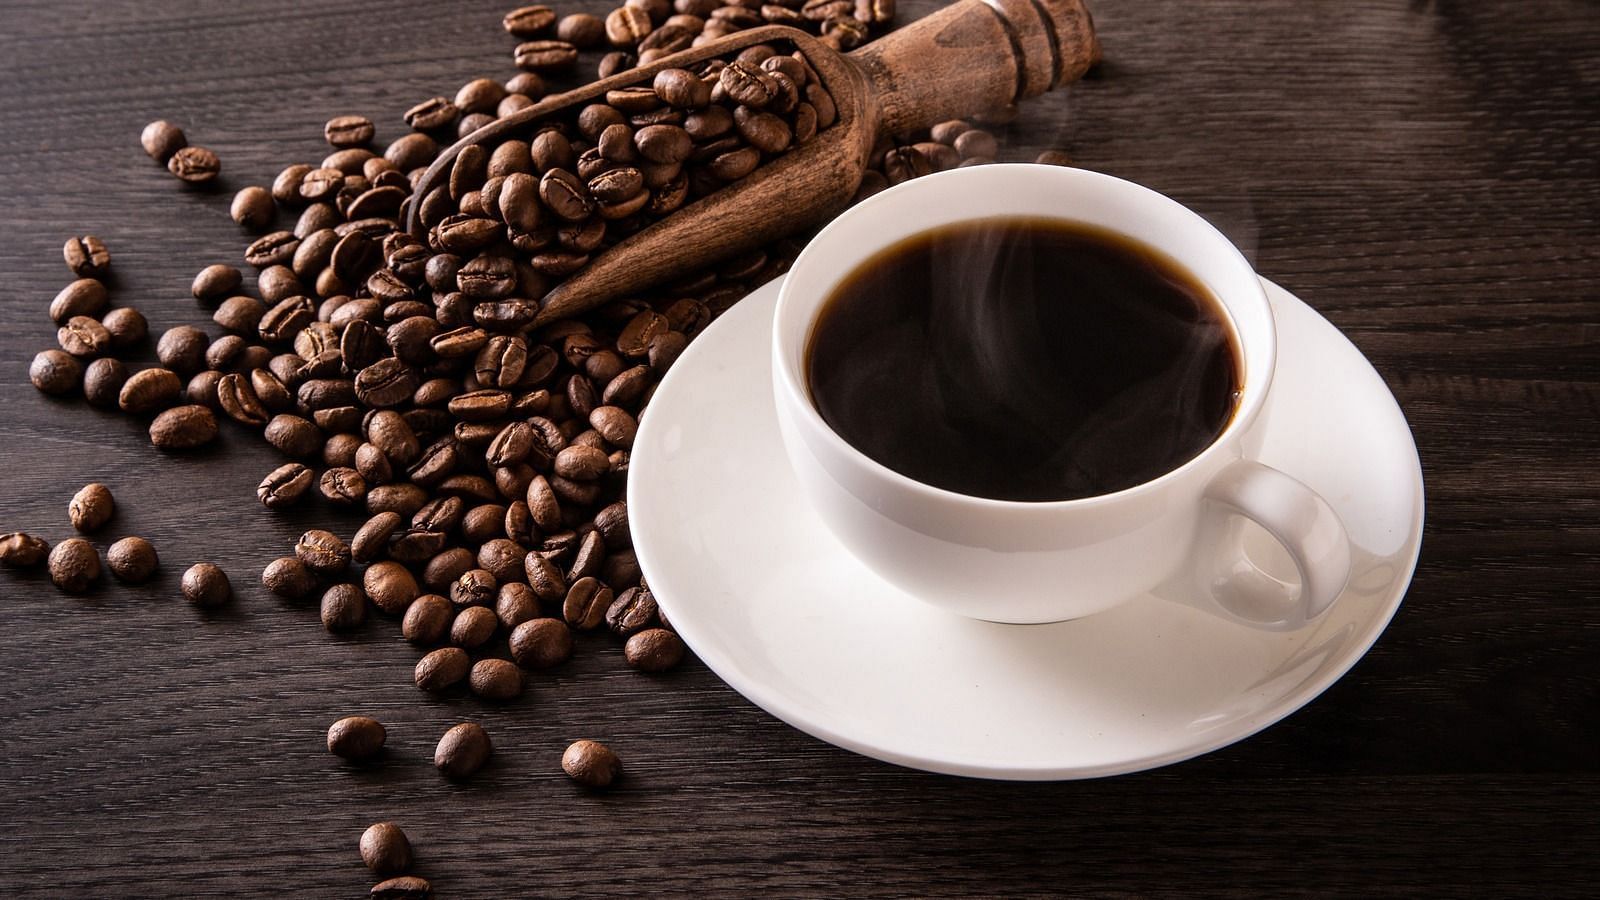 Coffee (Image via Getty Images)